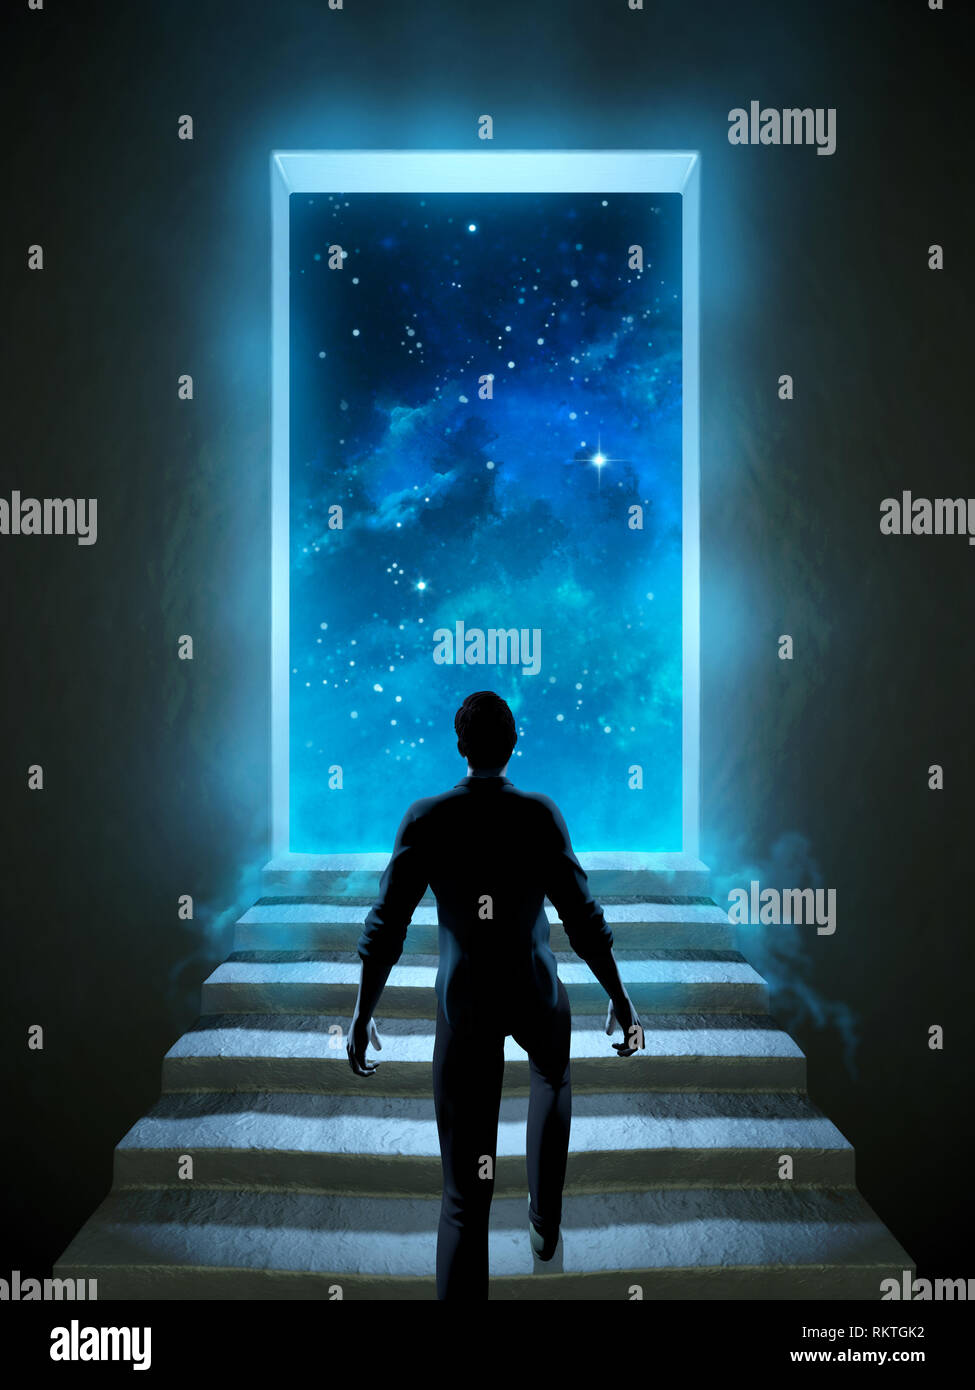 Man climbing a staircase leading to a door over the universe. Digital illustration. Stock Photo